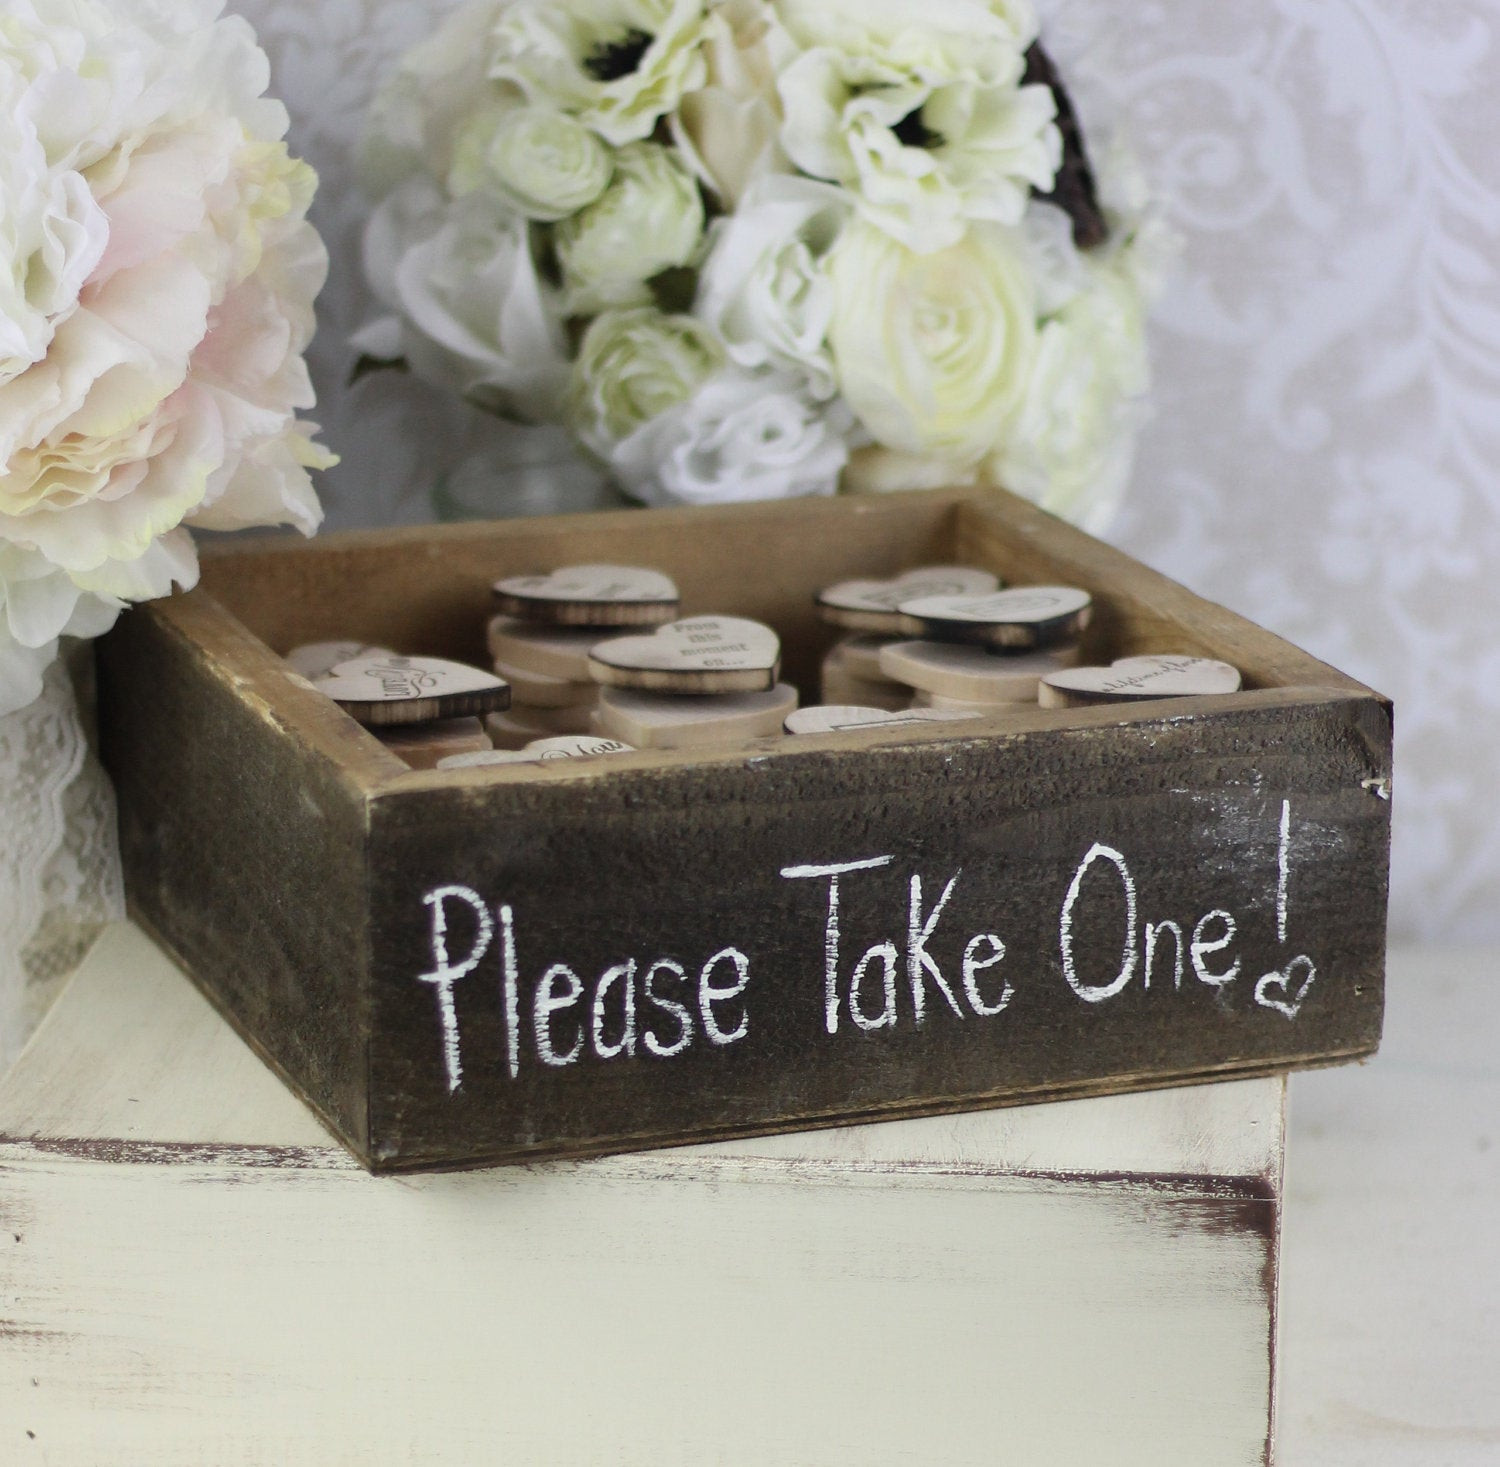 Country Wedding Favors DIY
 Unavailable Listing on Etsy